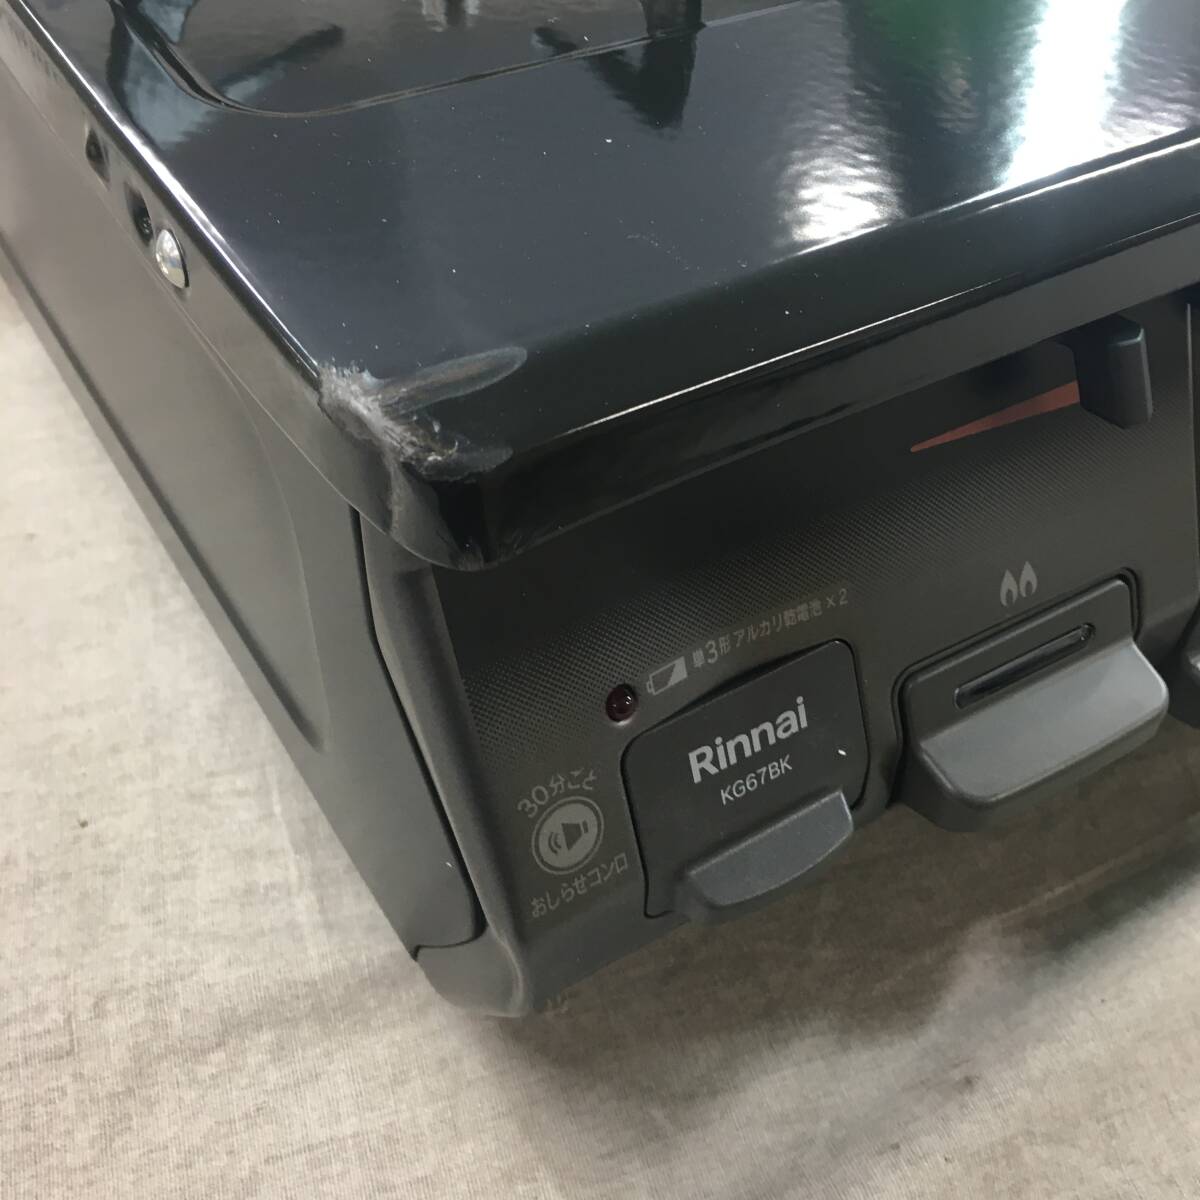  unused Rinnai gas-stove width approximately 60cm one side . grill push ignition right a little over heating power city gas black KG67BKR/13A